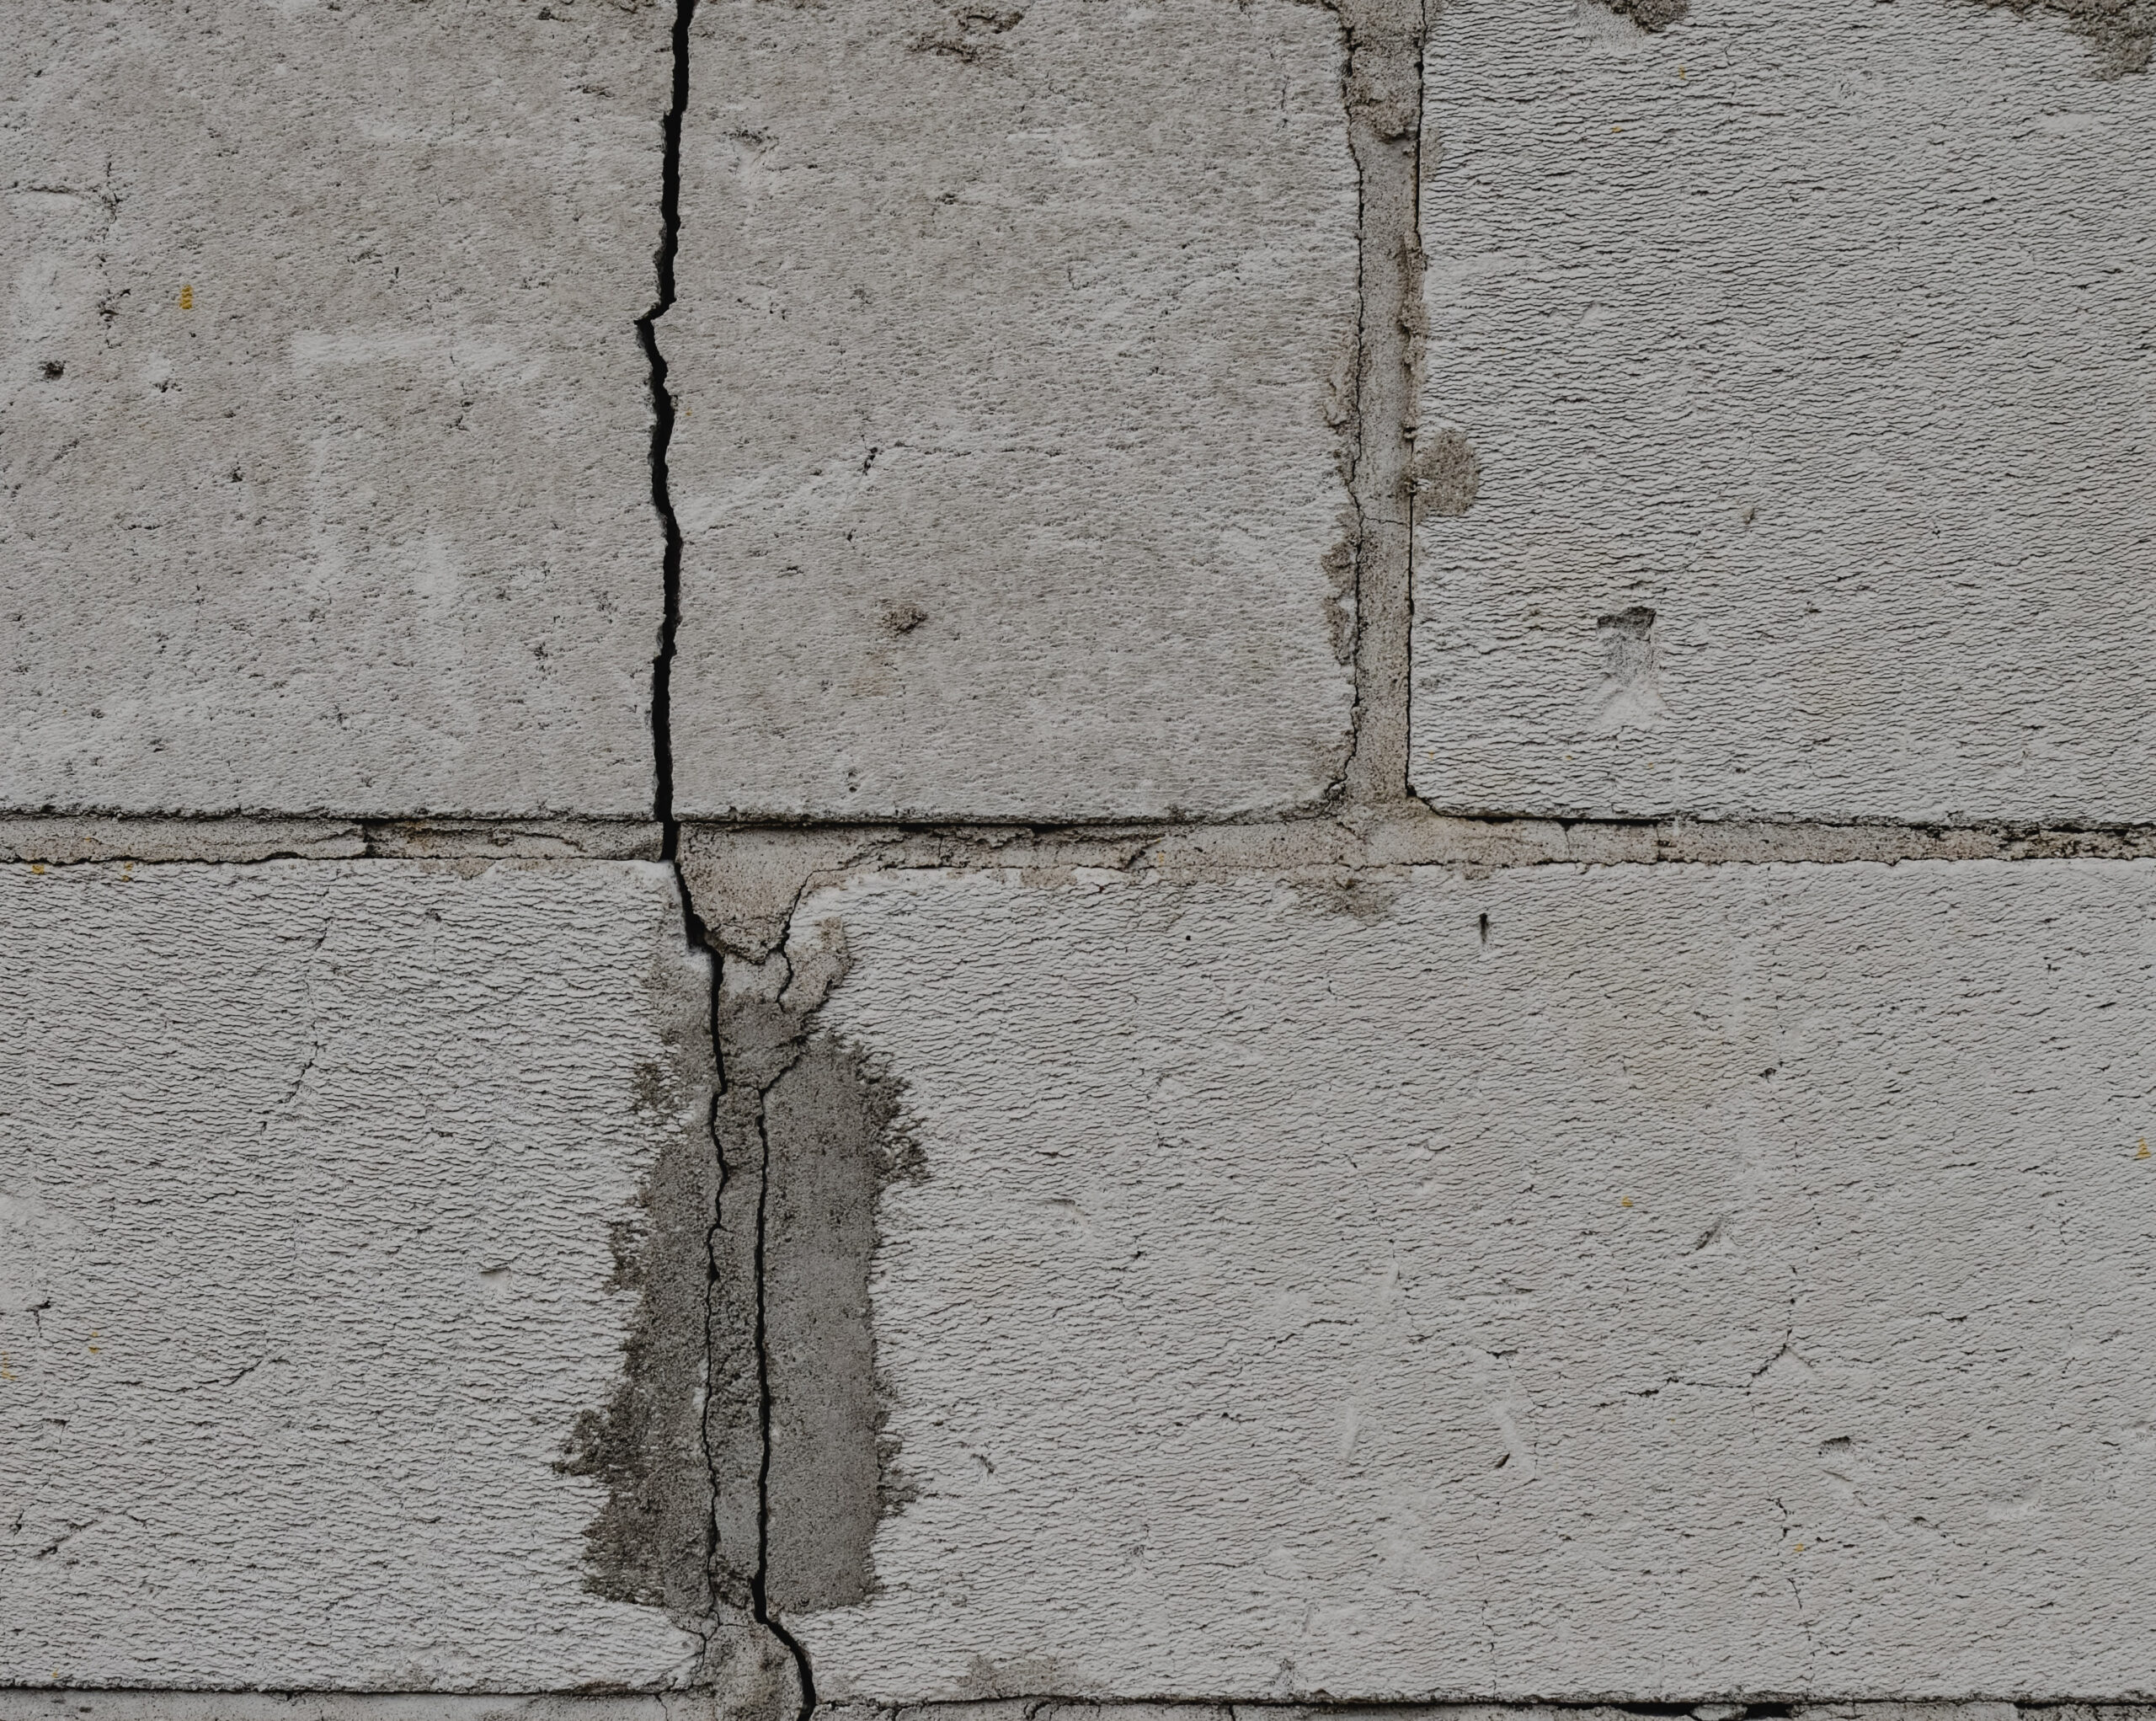 Repairing a Cracked Foundation: What You Need to Know